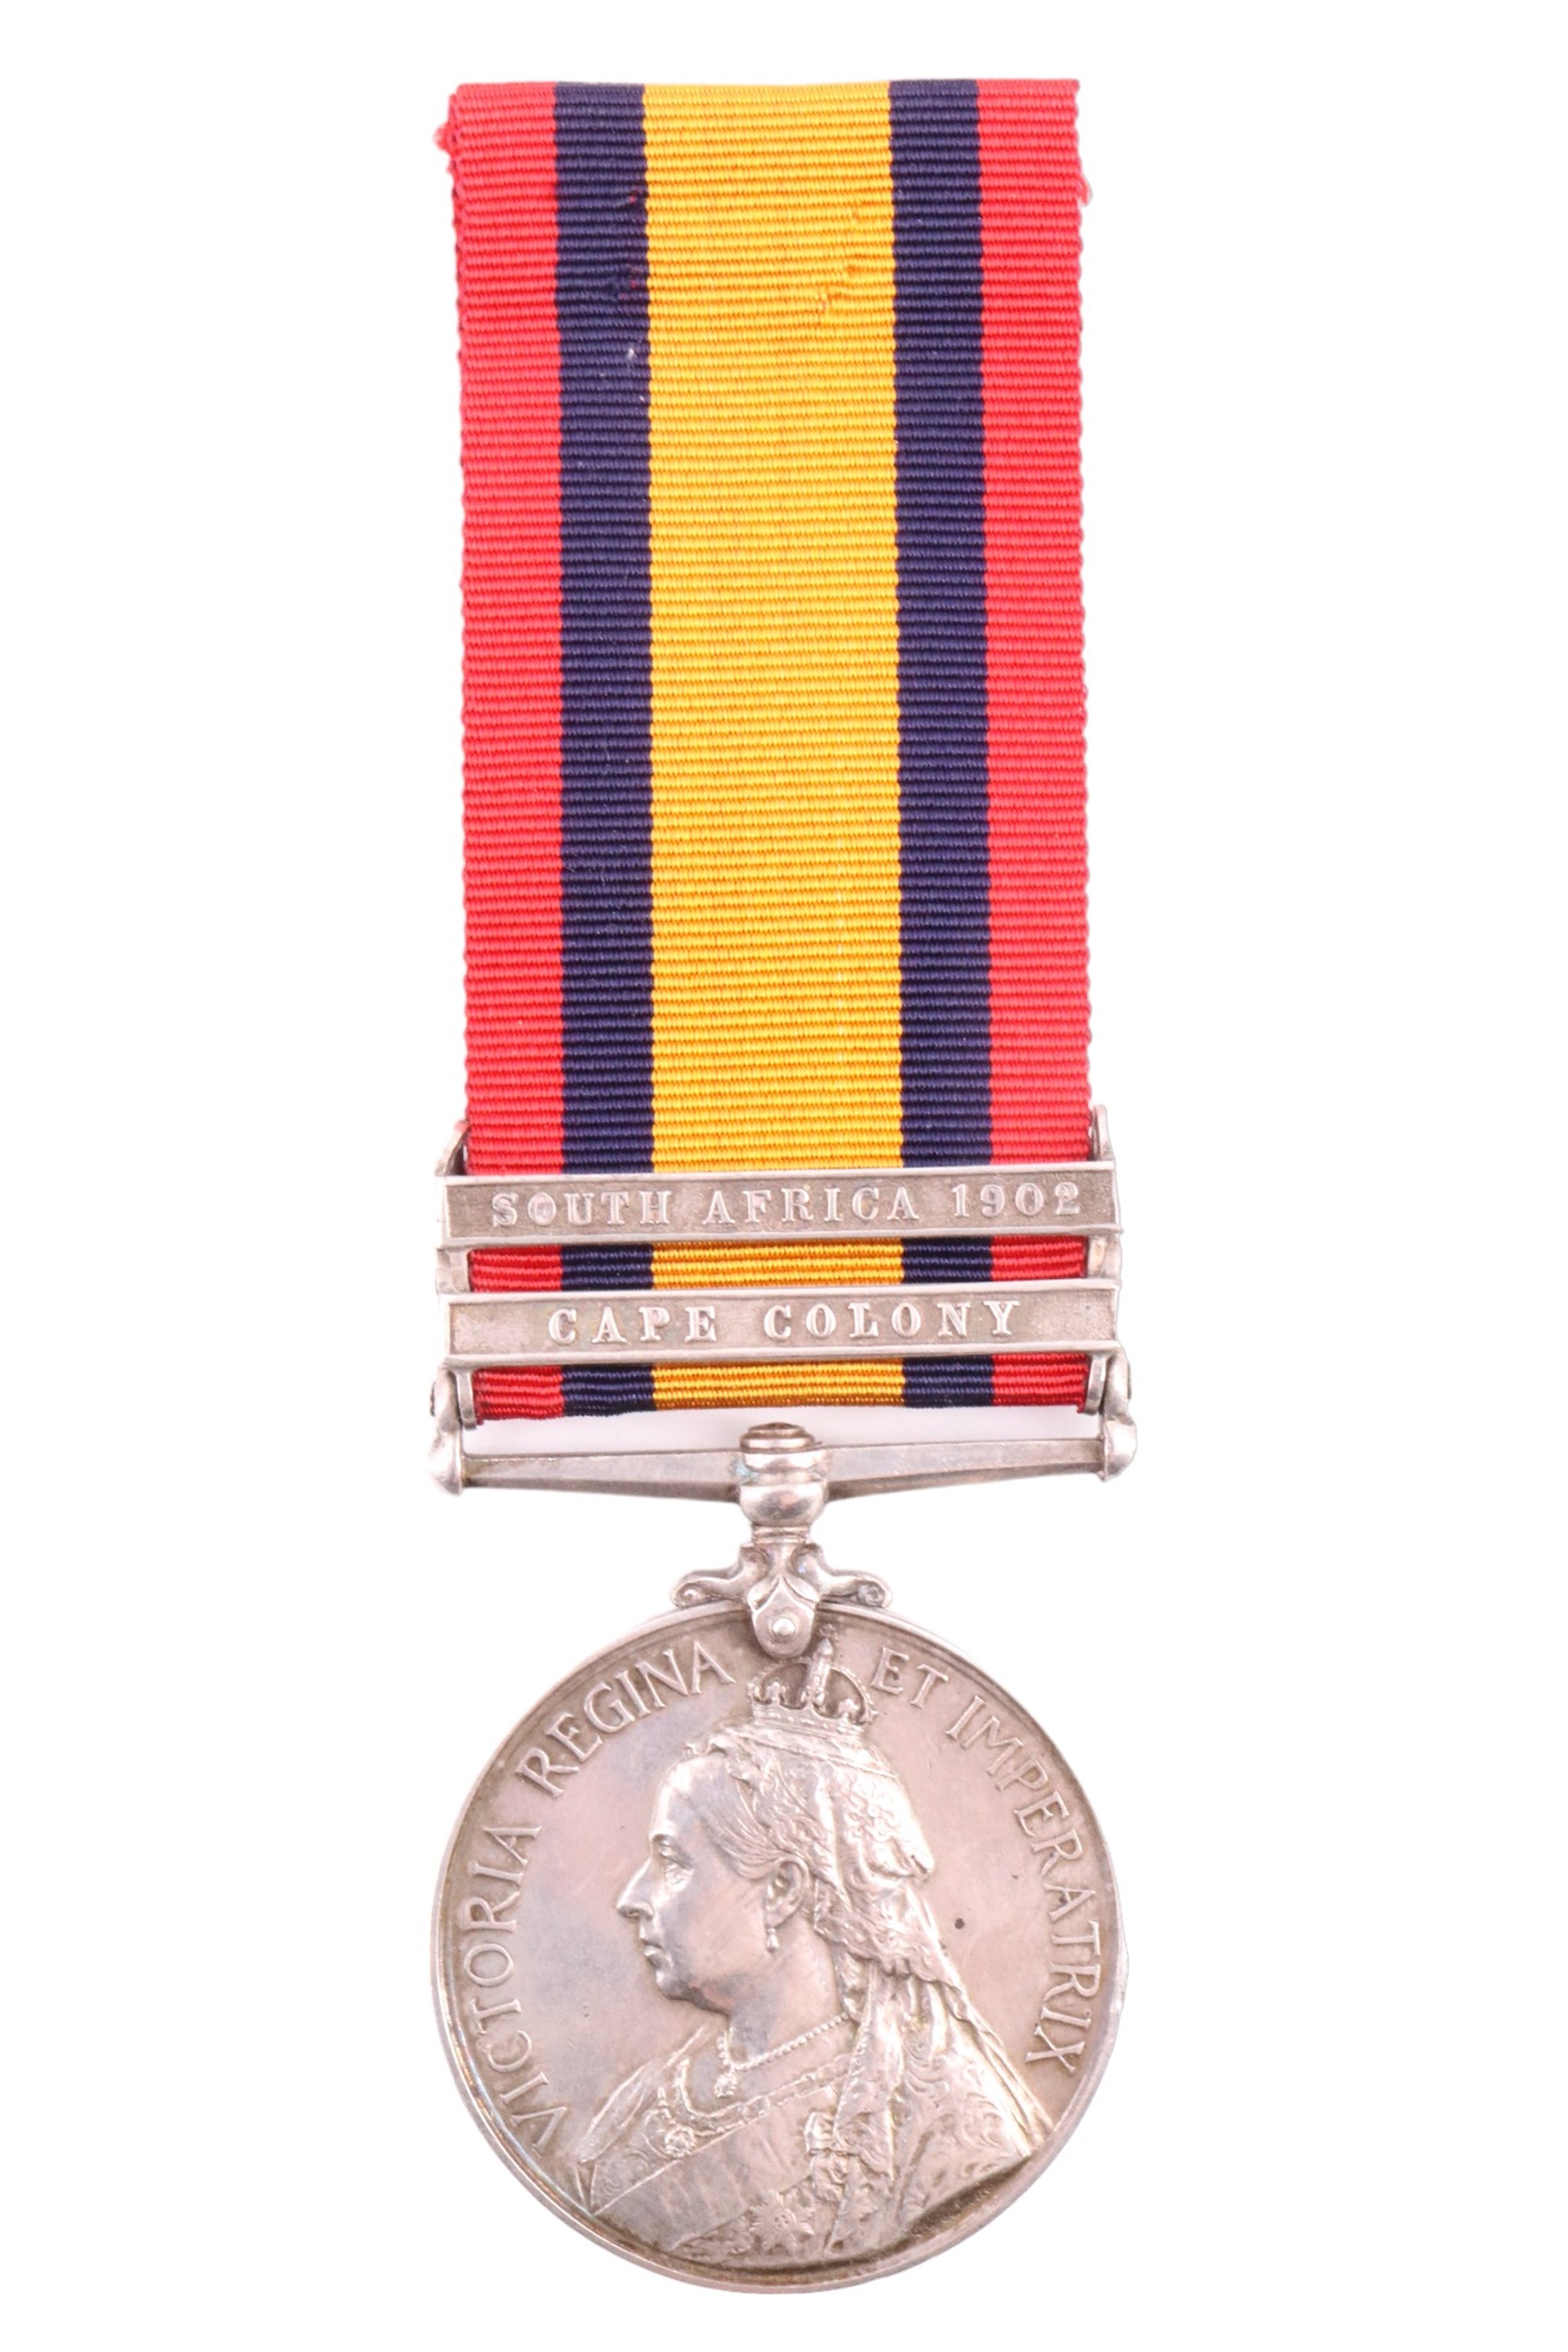 A Queen's South Africa Medal with two clasps to 6233 Pte G Myatt, Rl Warwick Regt, with research